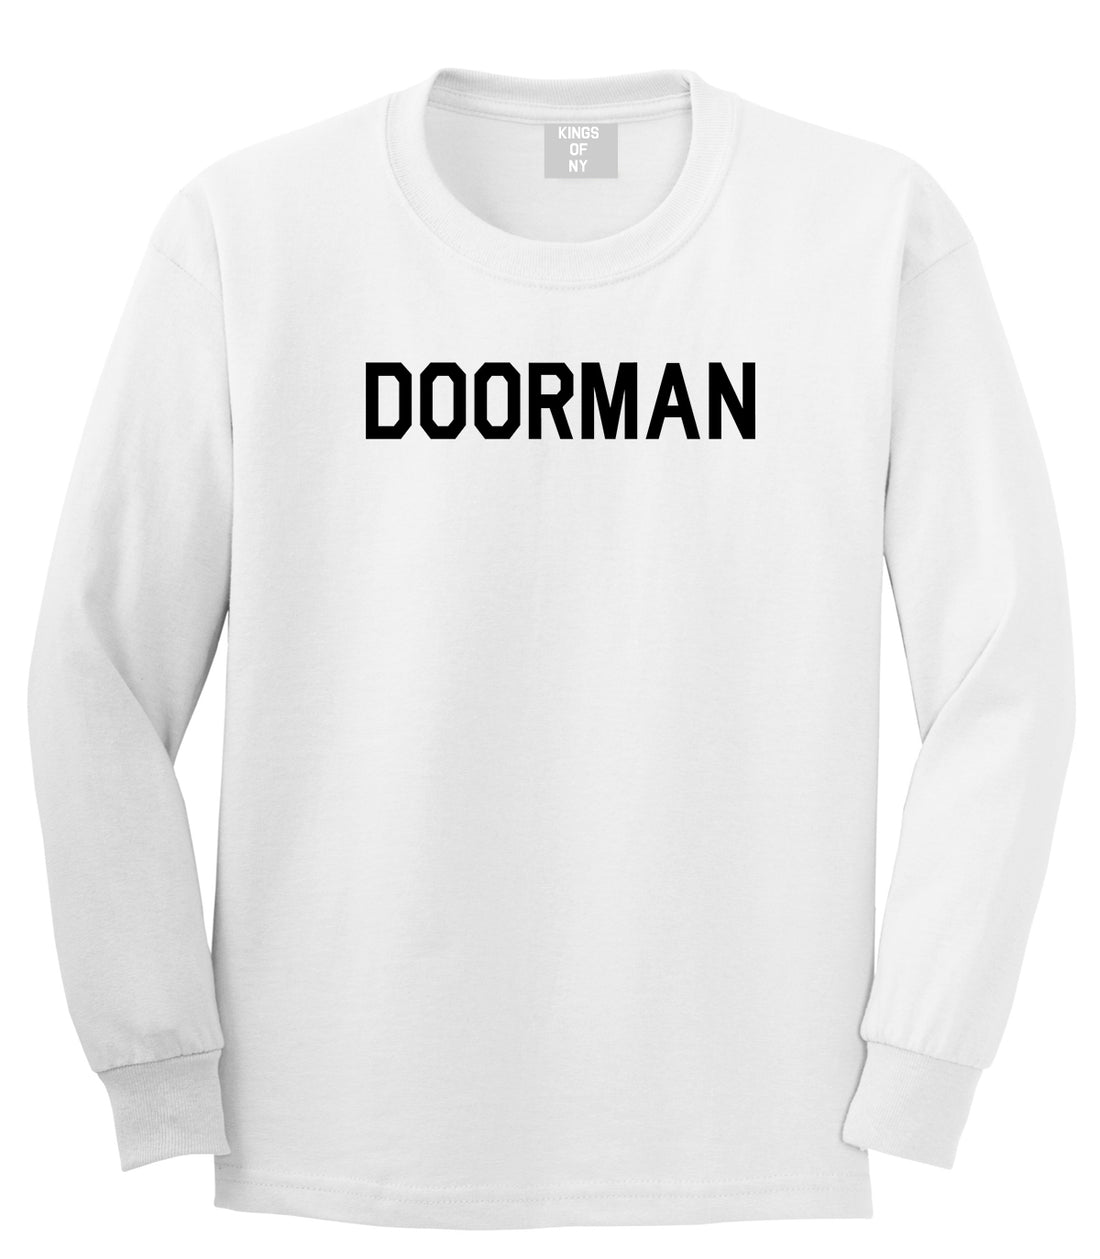 Doorman Mens White Long Sleeve T-Shirt by Kings Of NY